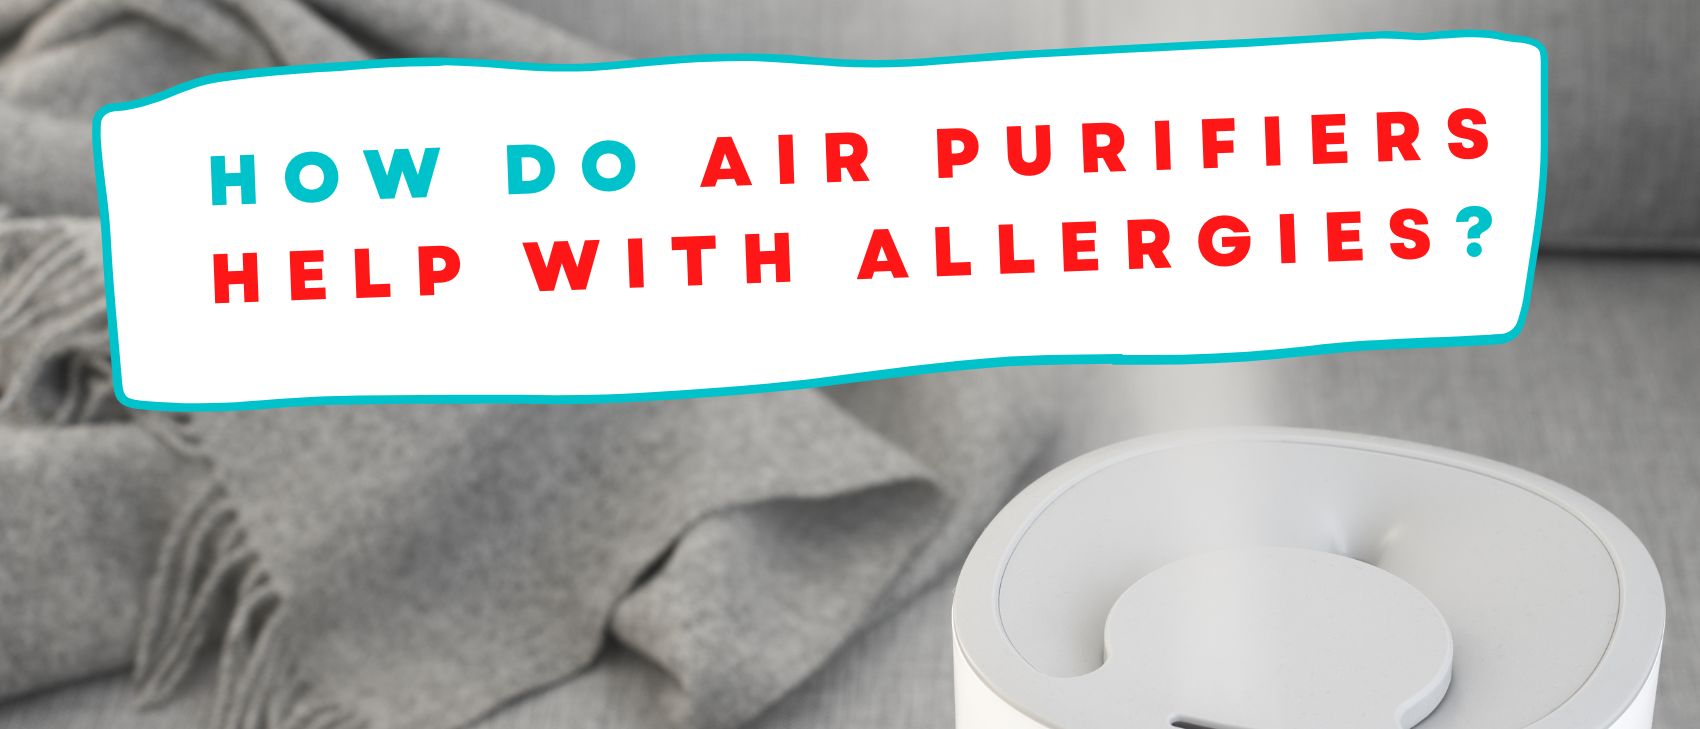 How Do Air Purifiers Help With Allergies?